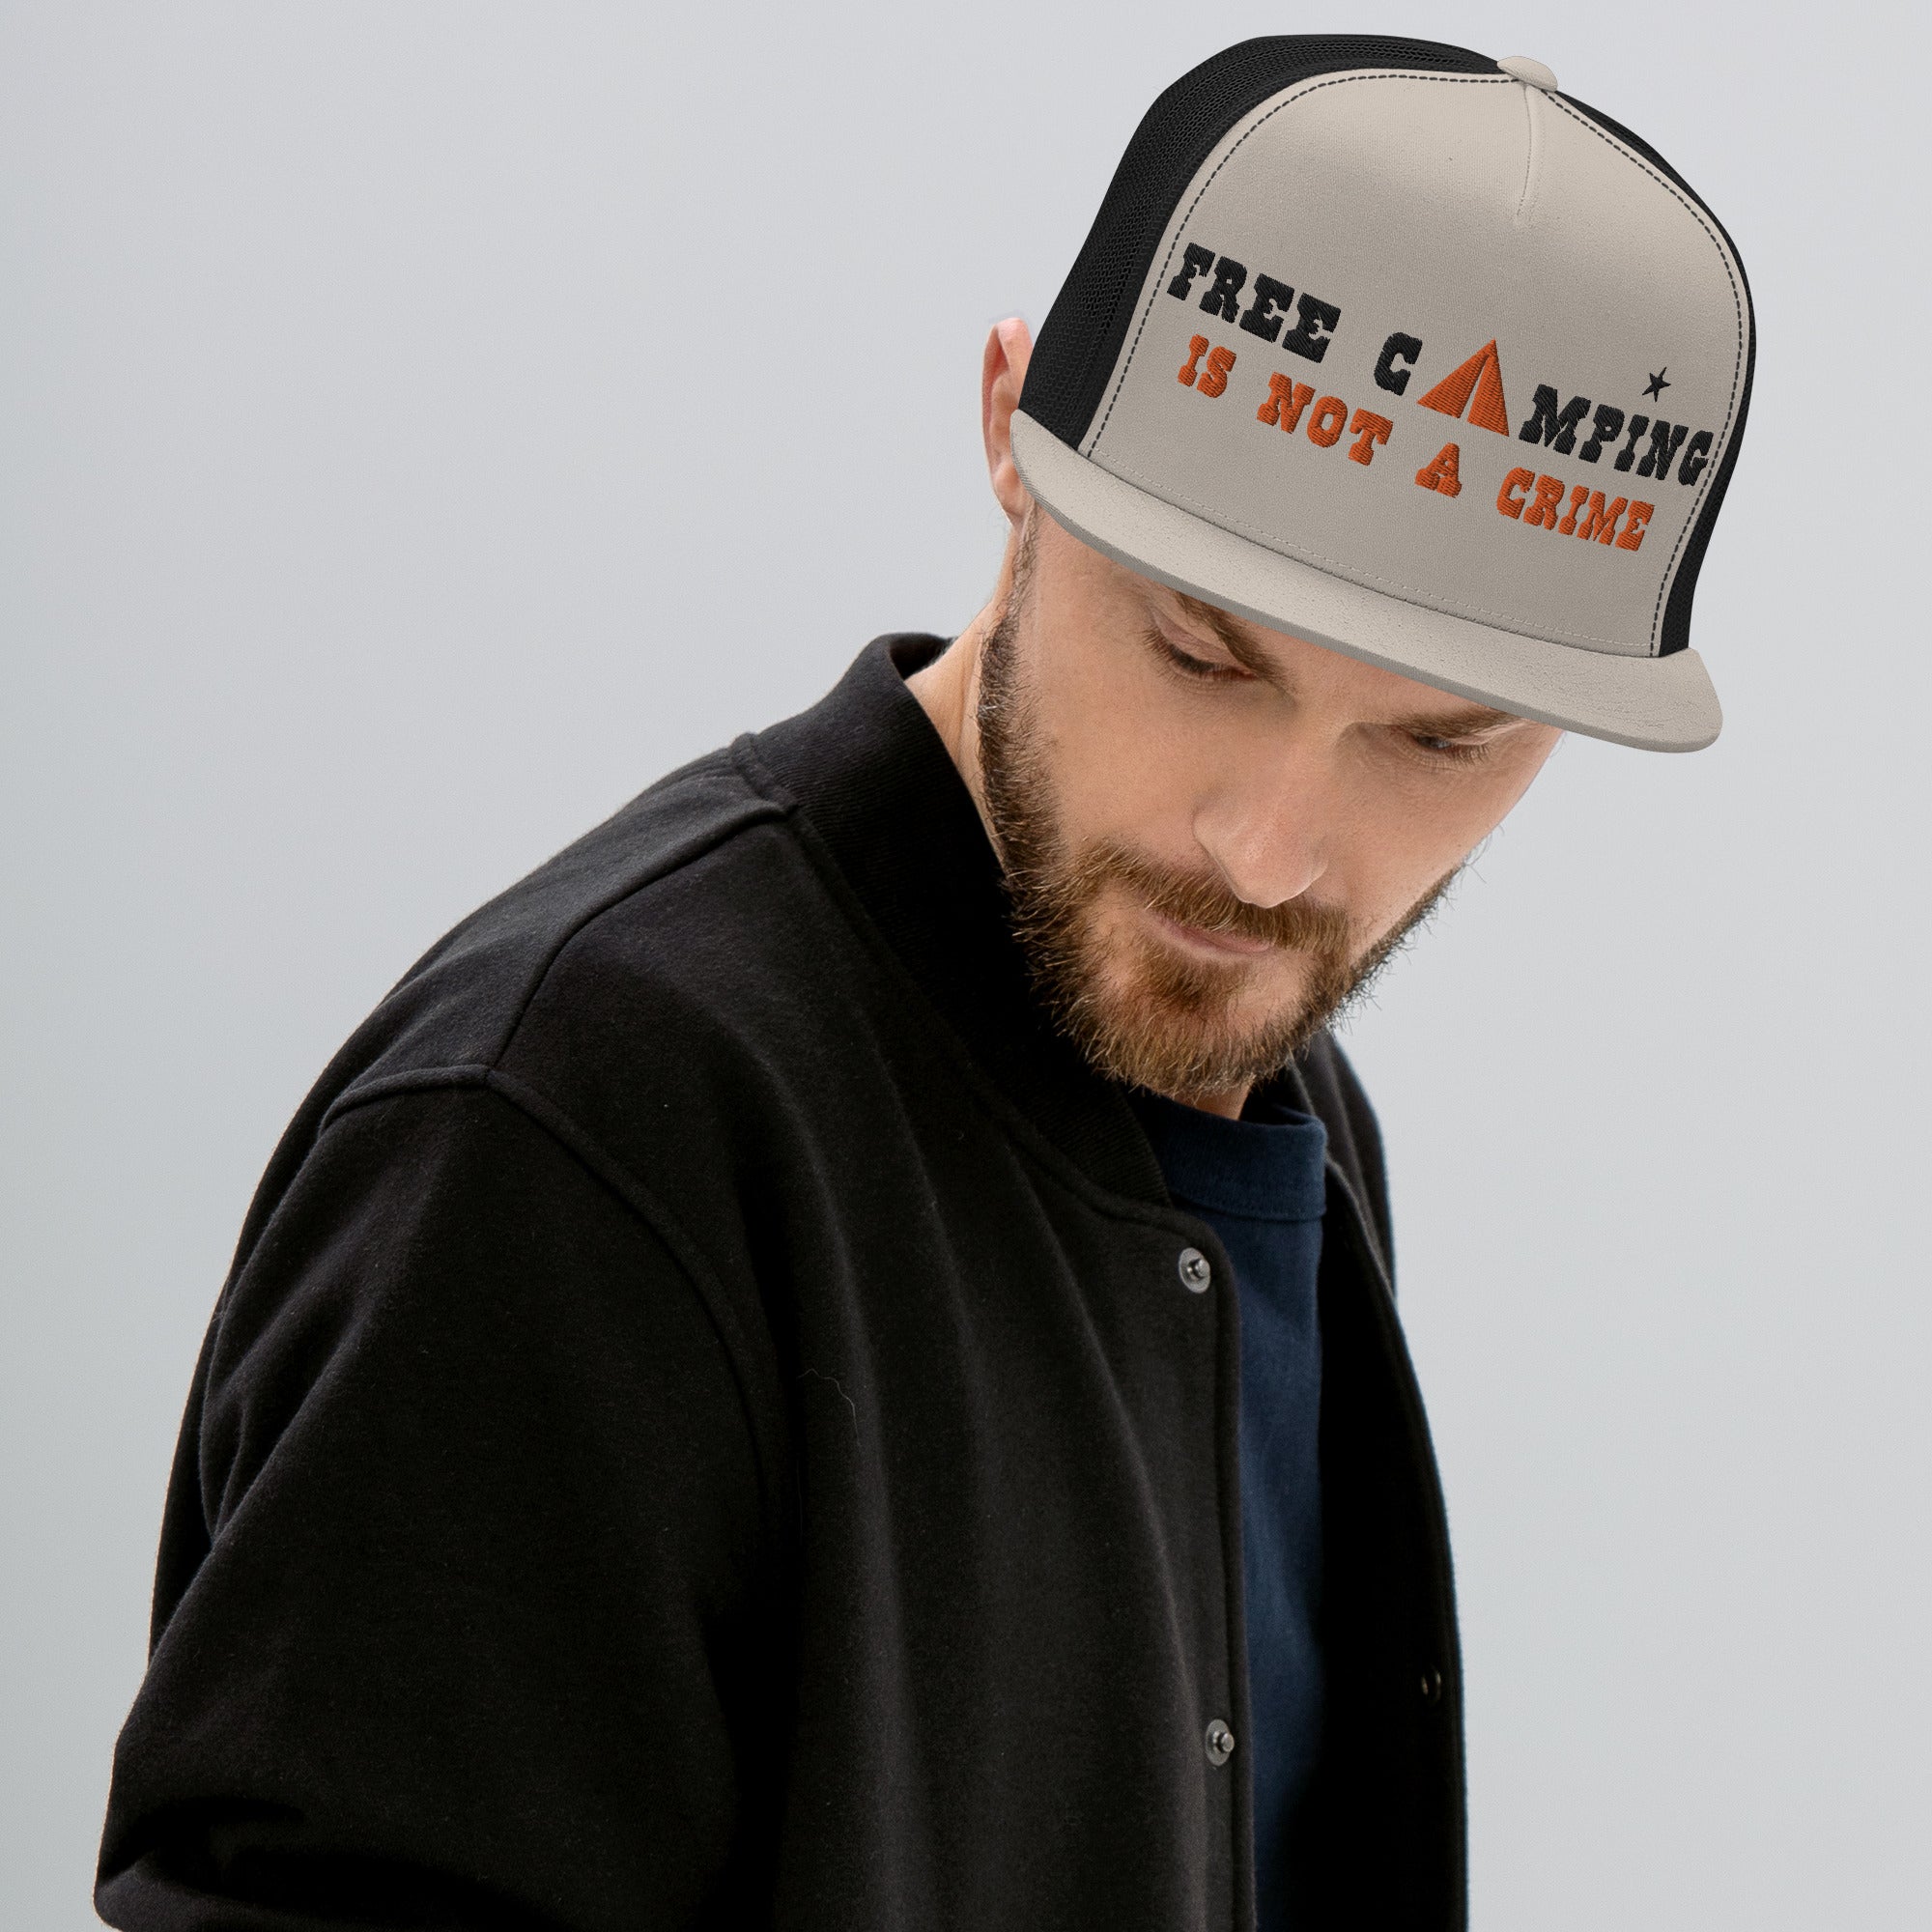 Two-Tone Trucker Cap Free camping is not a crime black/orange